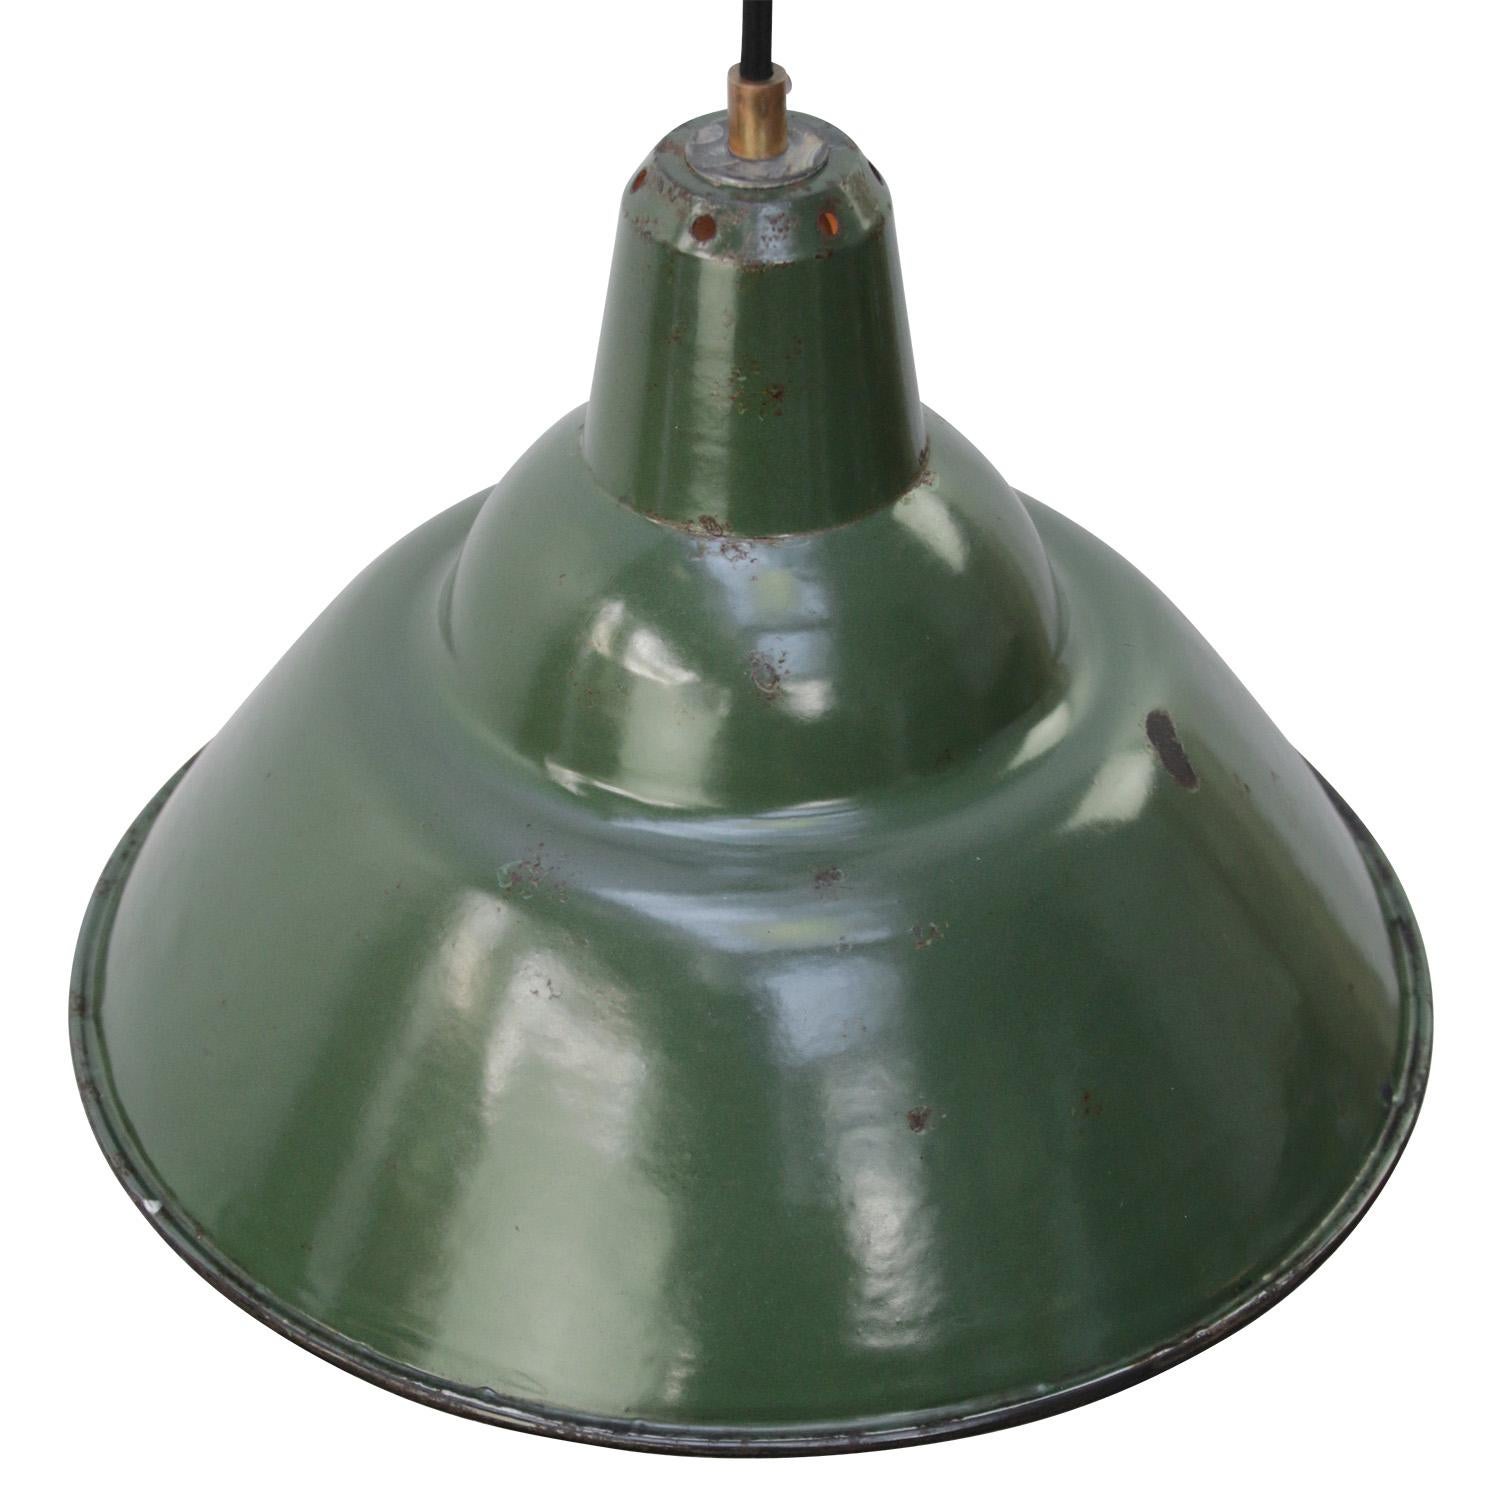 British warehouse, industrial pendant.
Thick dark green enamel shade with white interior. 

Weight: 0.95 kg / 2.1 lb.

Priced per individual item. All lamps have been made suitable by international standards for incandescent light bulbs,